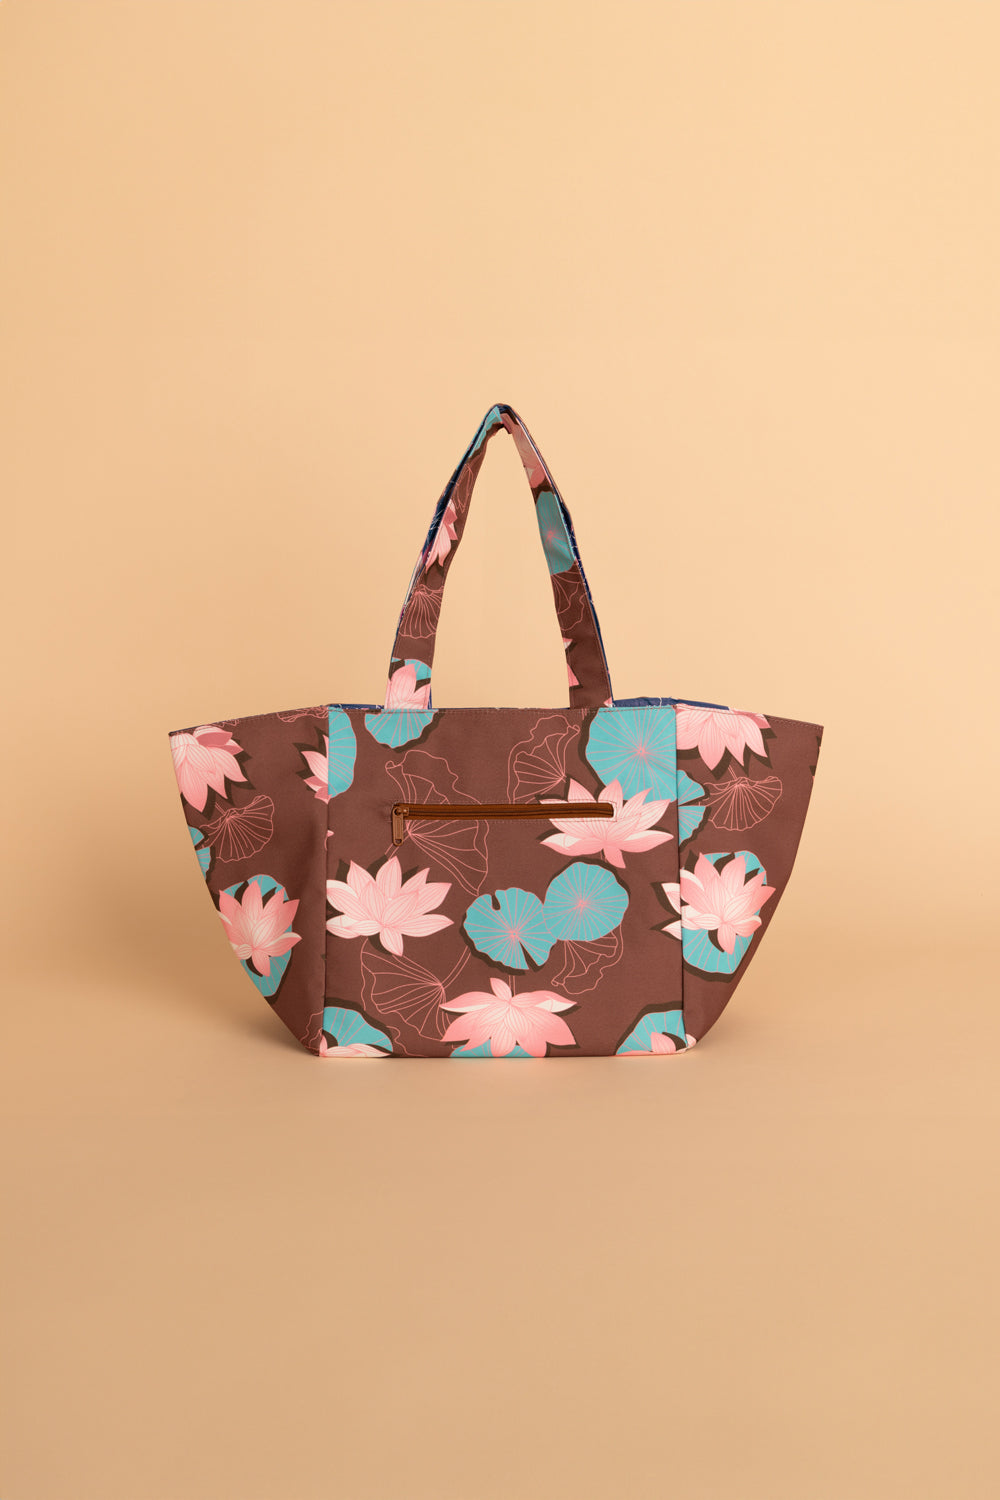 Reversible Tote - Azure/Dolce Waterlily